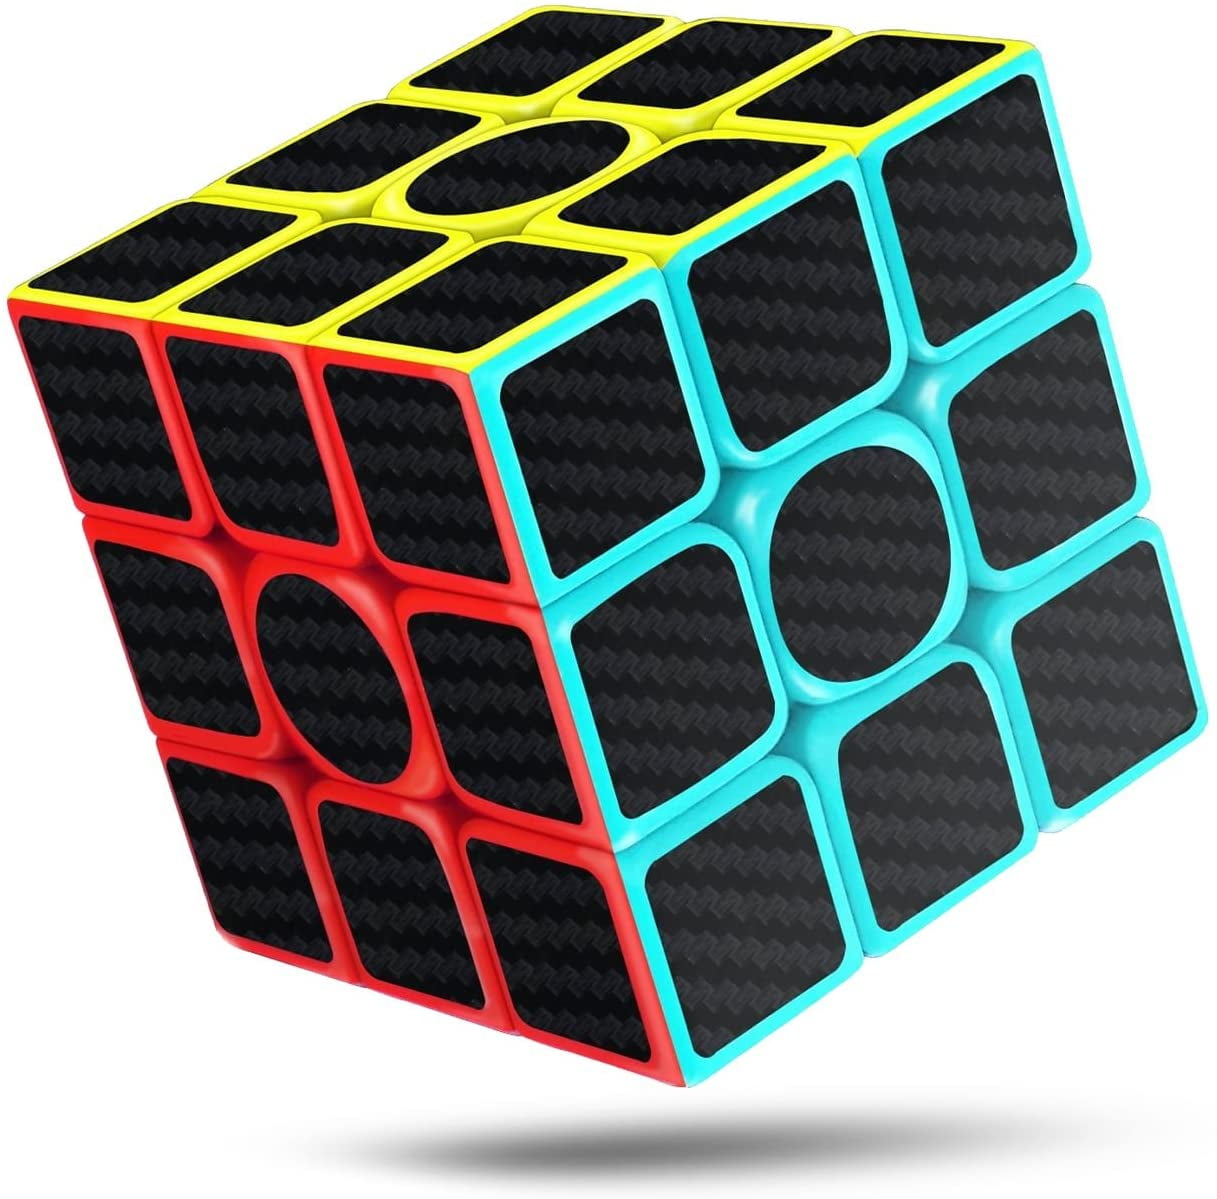 Rubik's Cube, 3x3 Magnetic Speed Cube, Super Fast Problem-Solving  Challenging Retro Fidget Toy Travel Brain Teaser for Adults & Kids Ages 8+